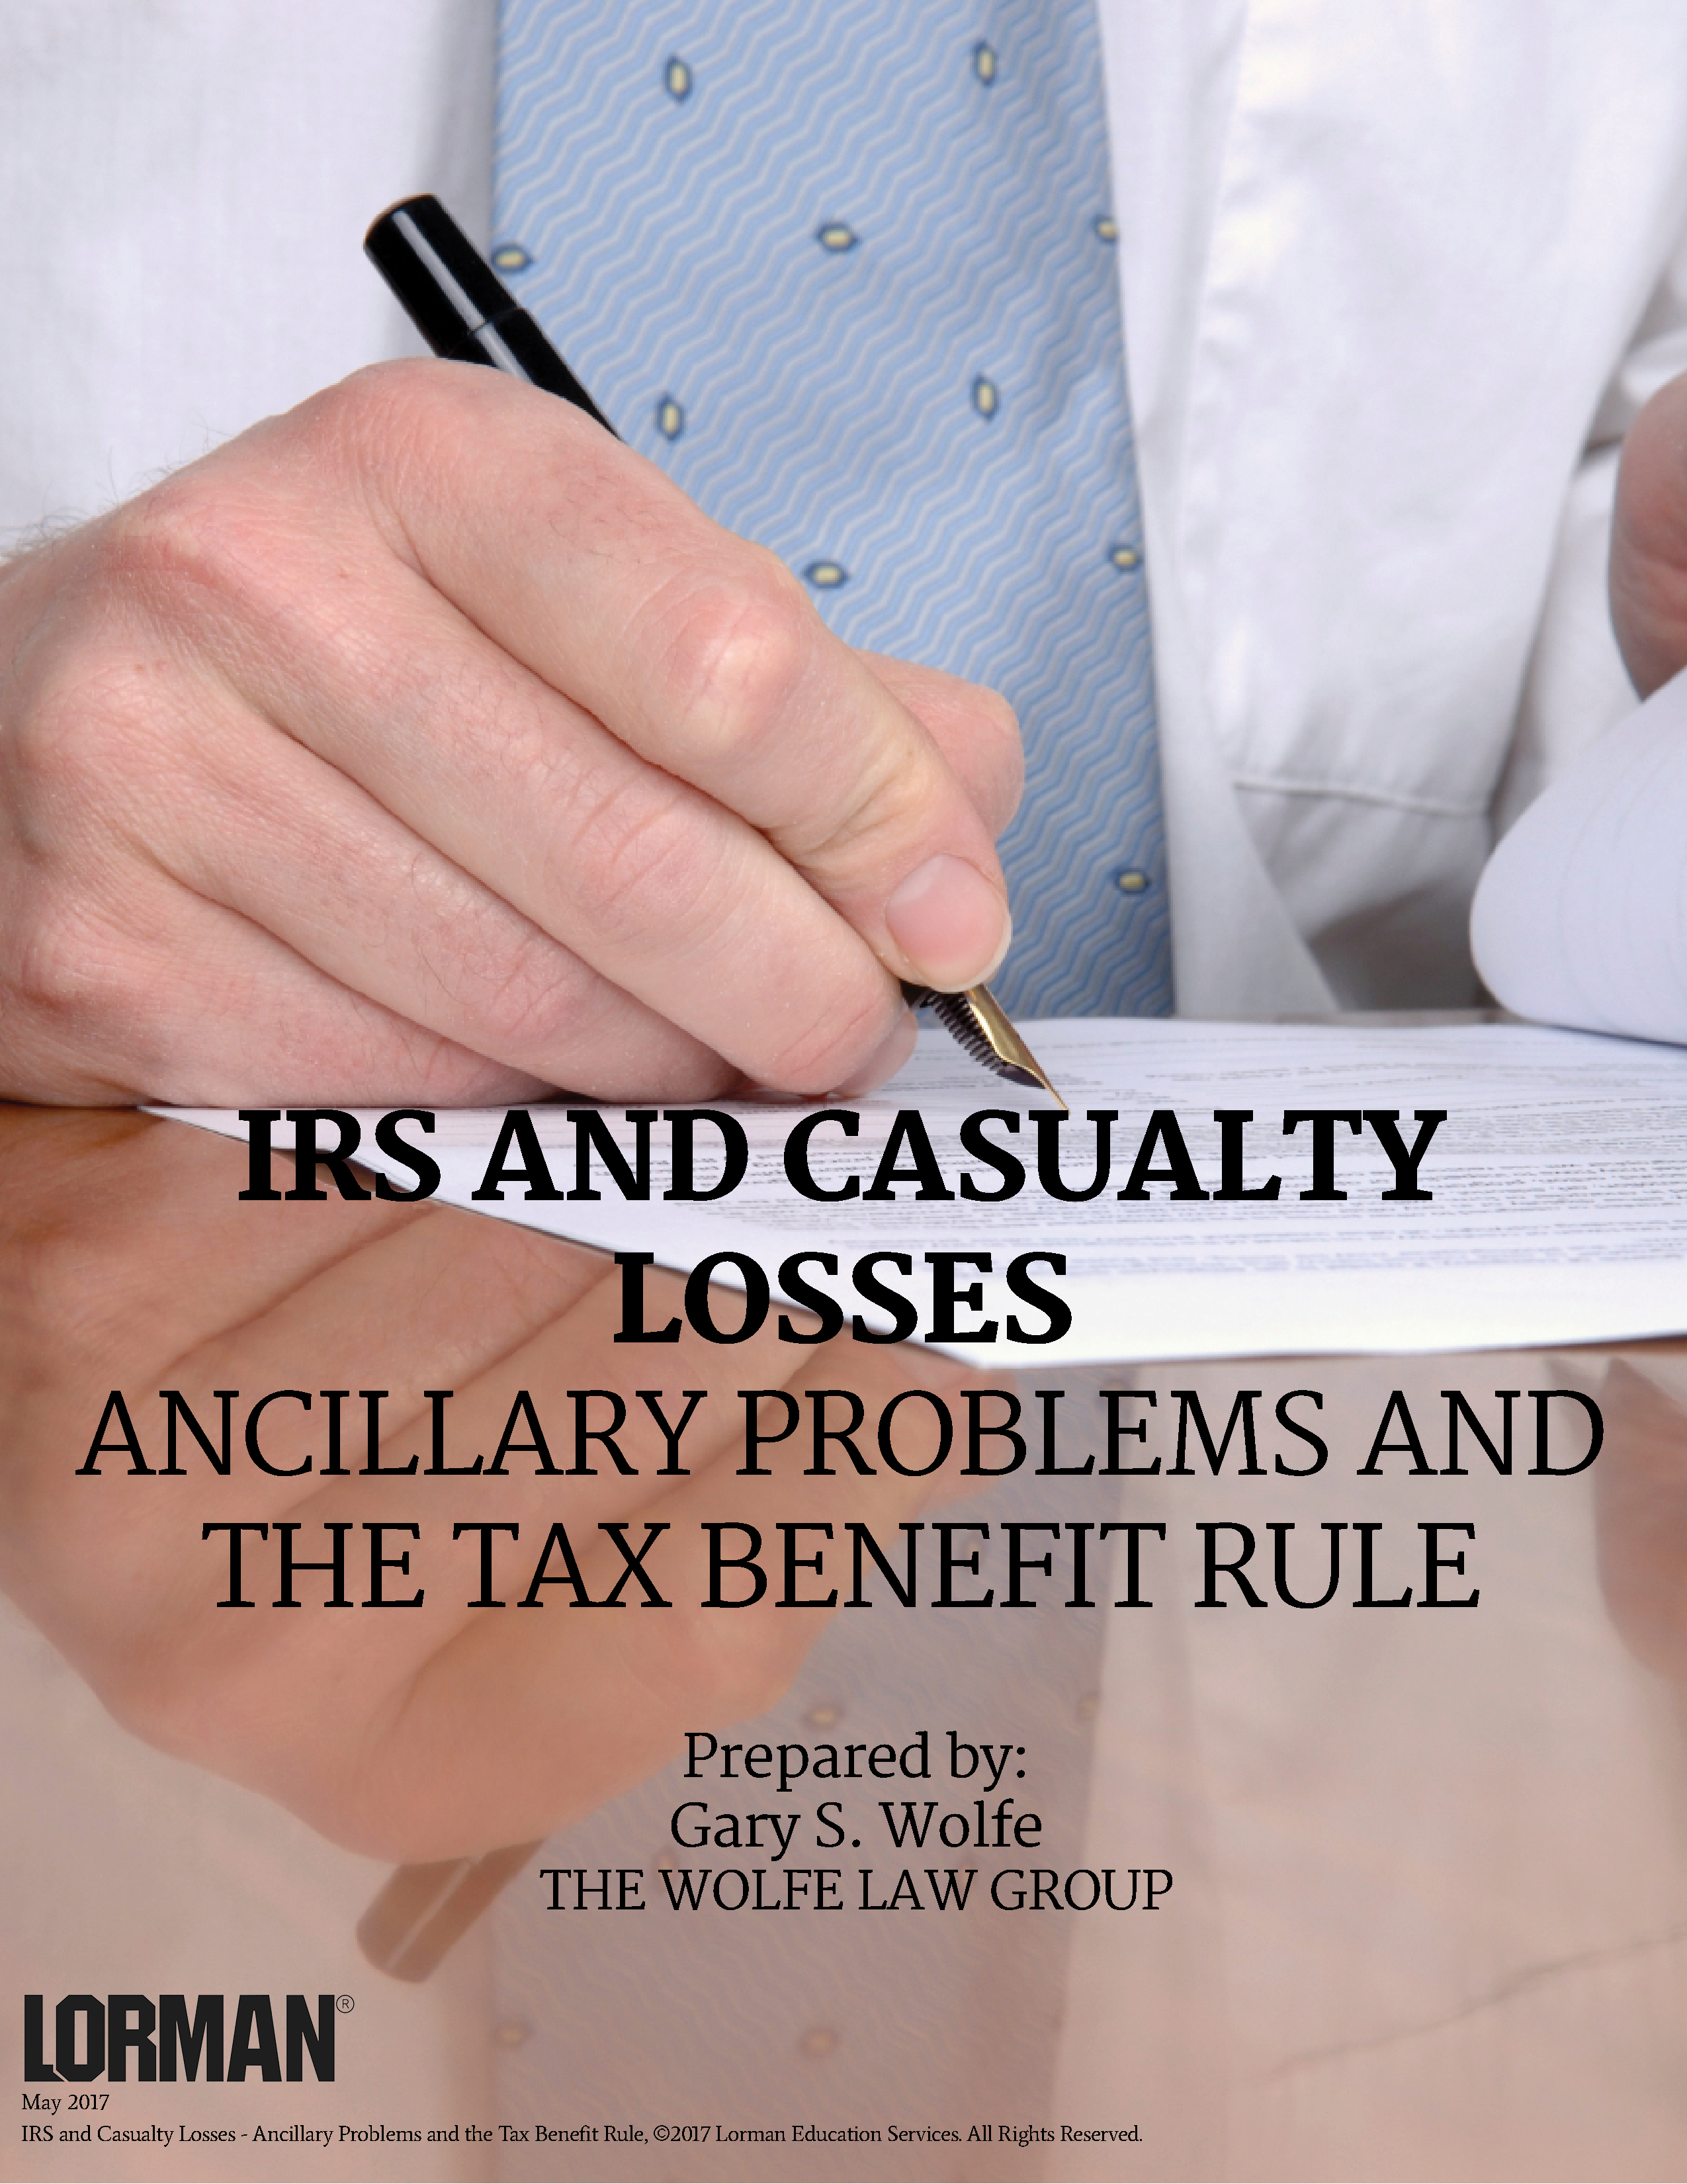 IRS and Casualty Losses - Ancillary Problems and the Tax Benefit Rule